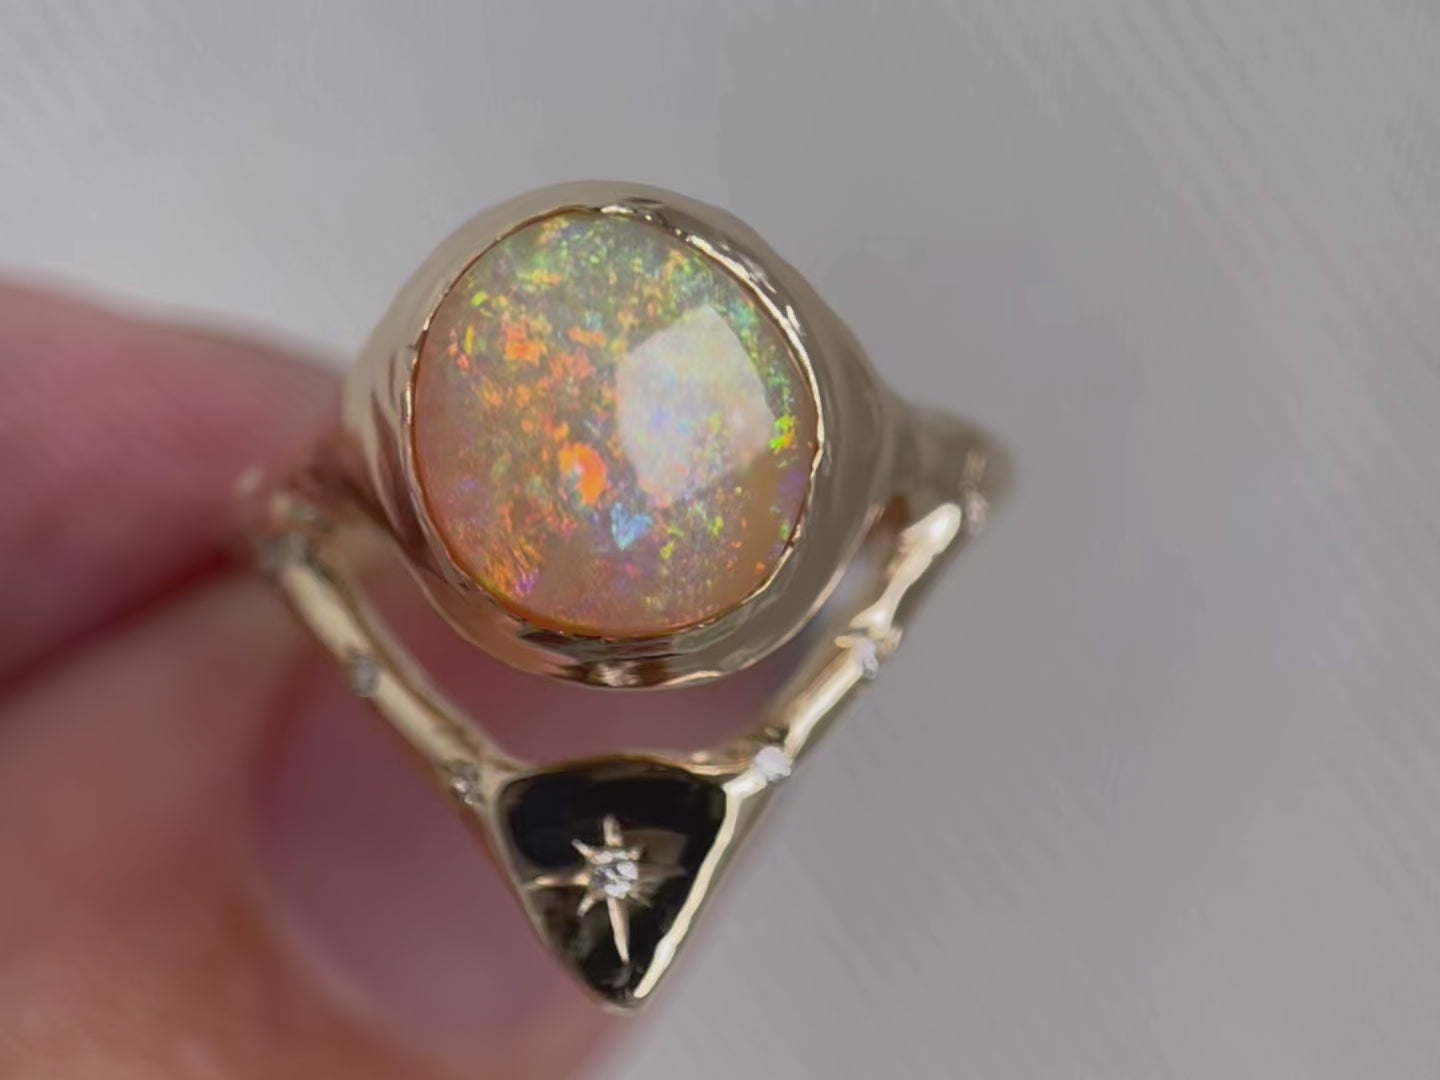 a video highlighting the colors in the opal and the diamond details